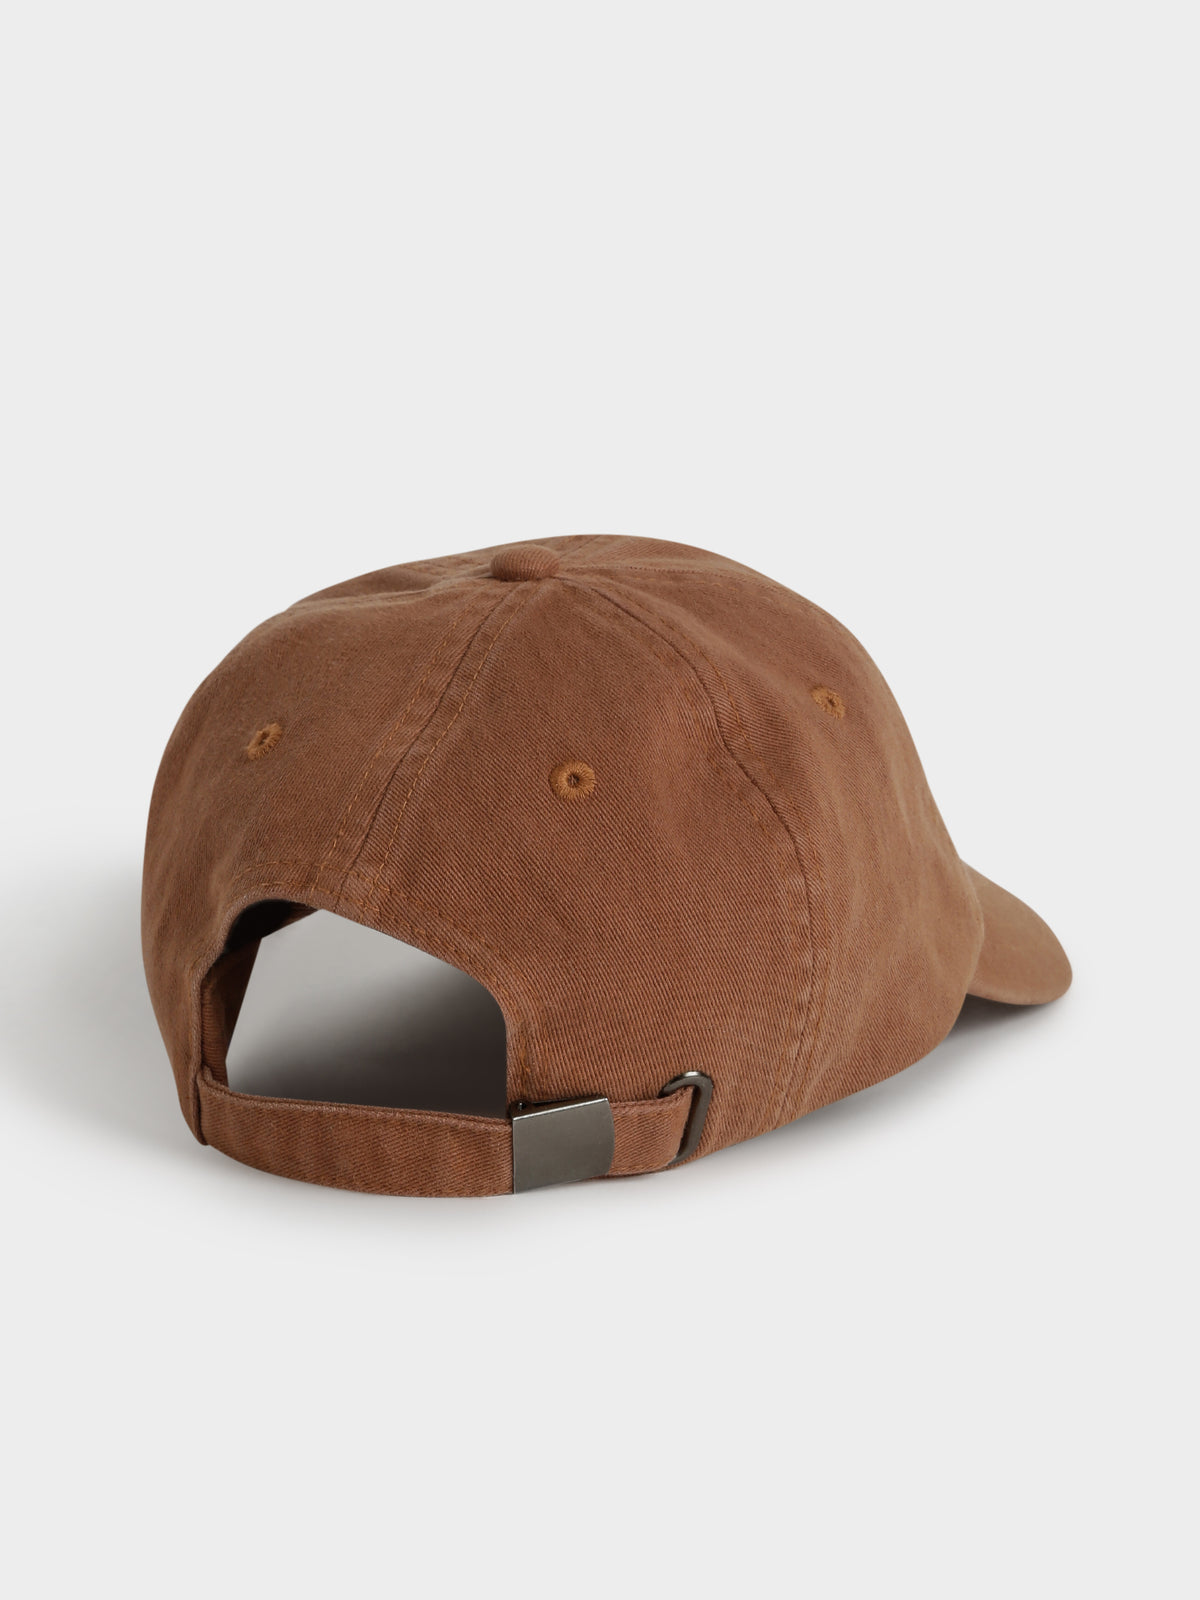 Mindful Dad Hat in Brown